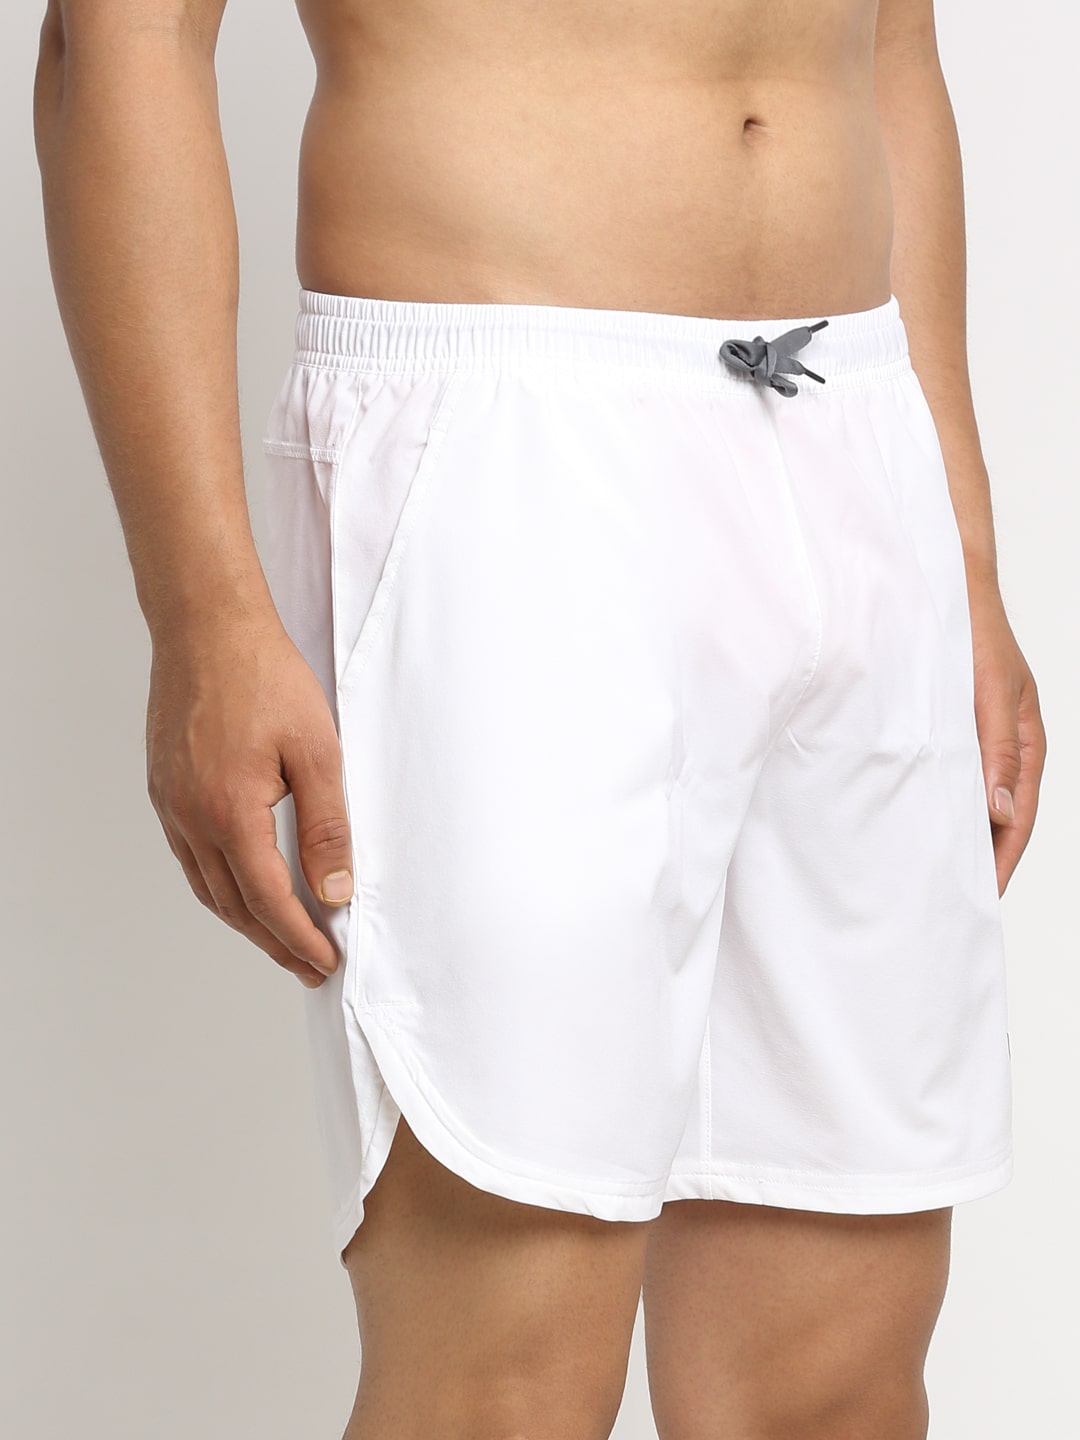 Invincible Men’s Feather Weight Crossfit Shorts